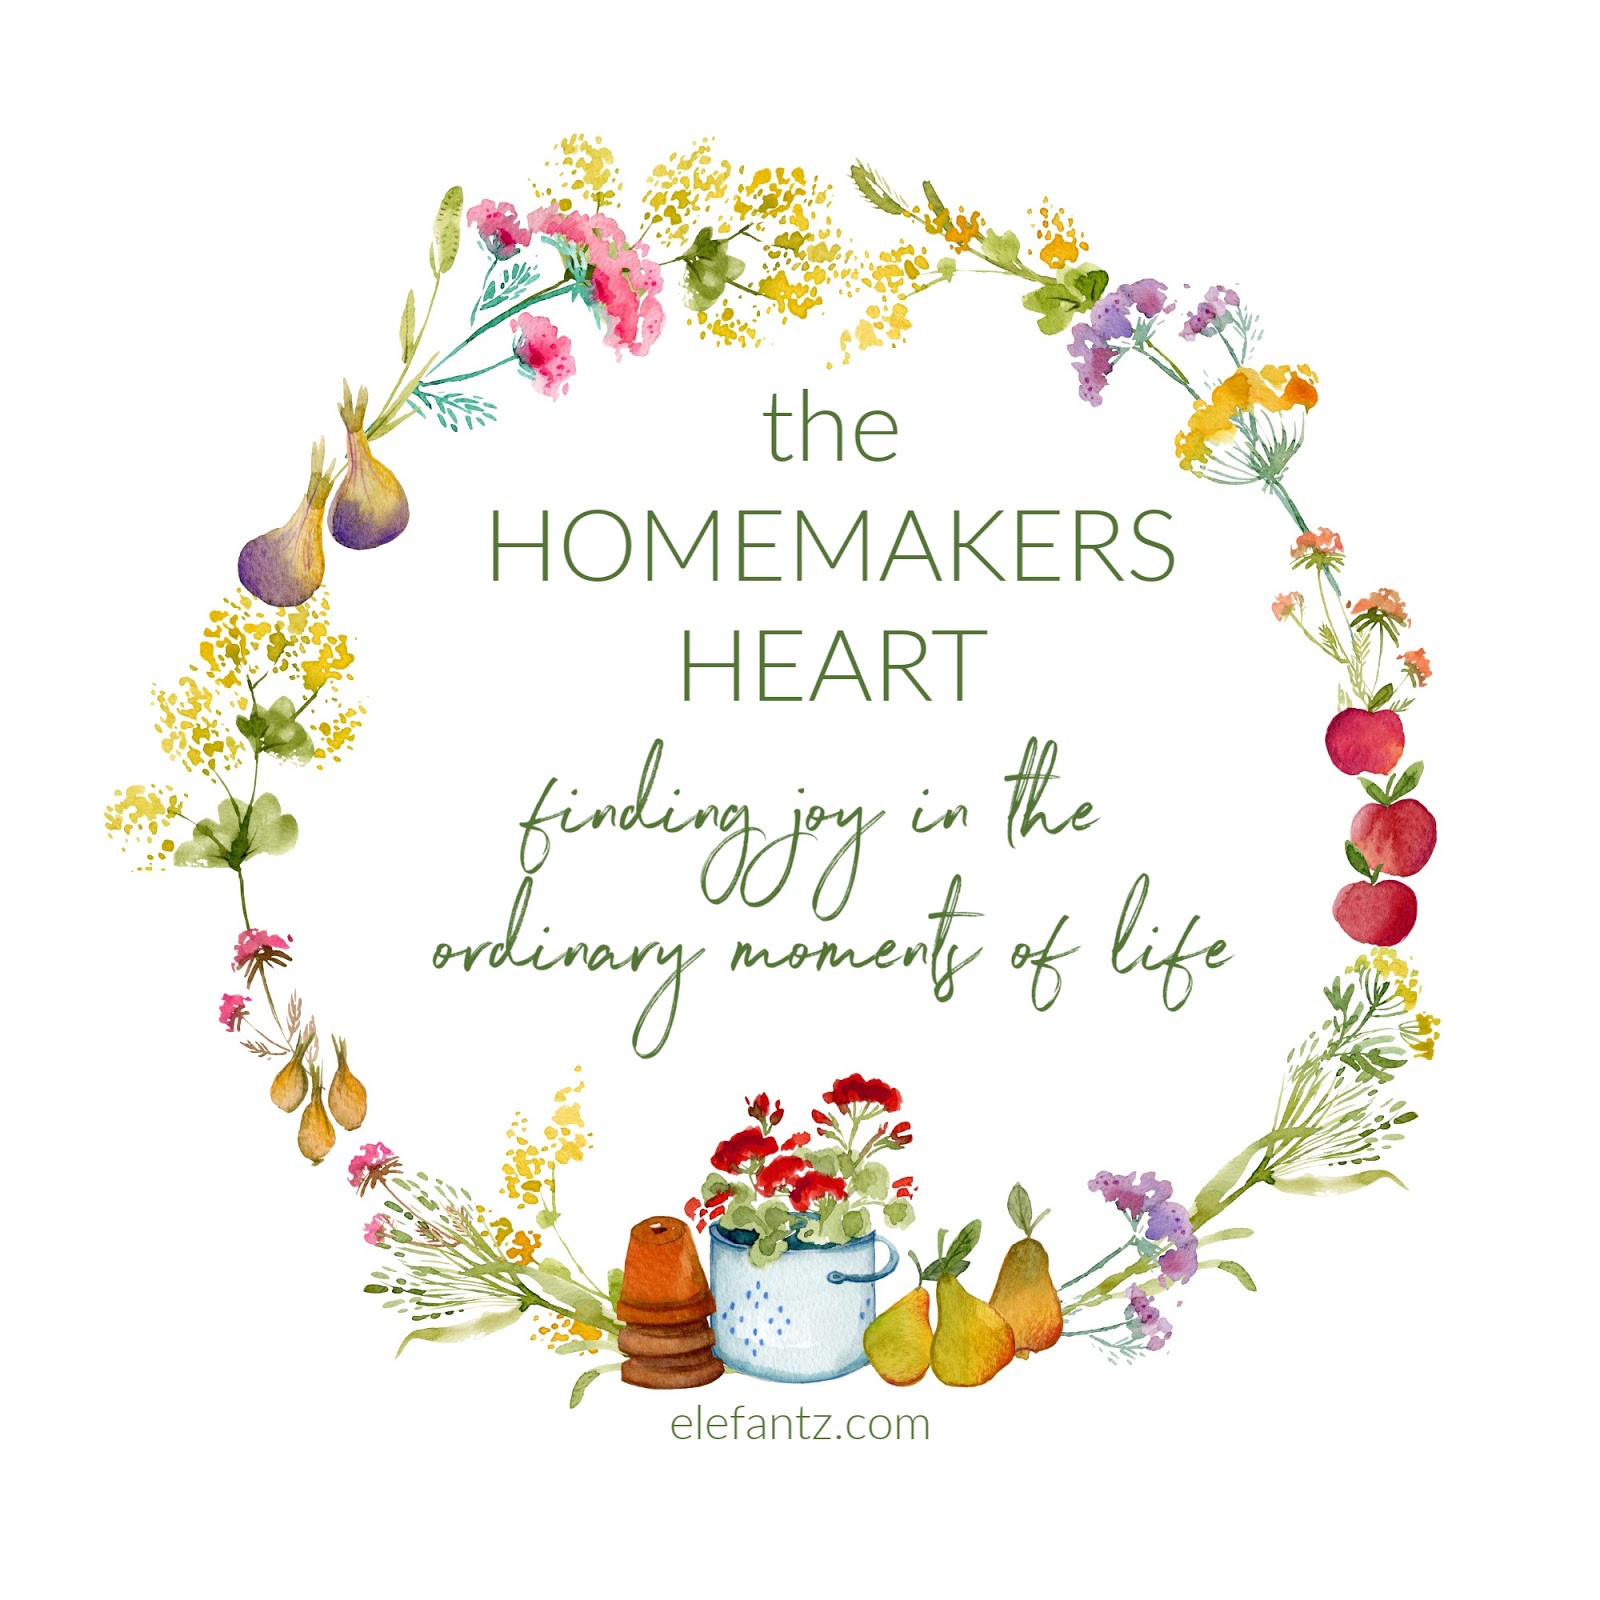 The Homemakers Heart